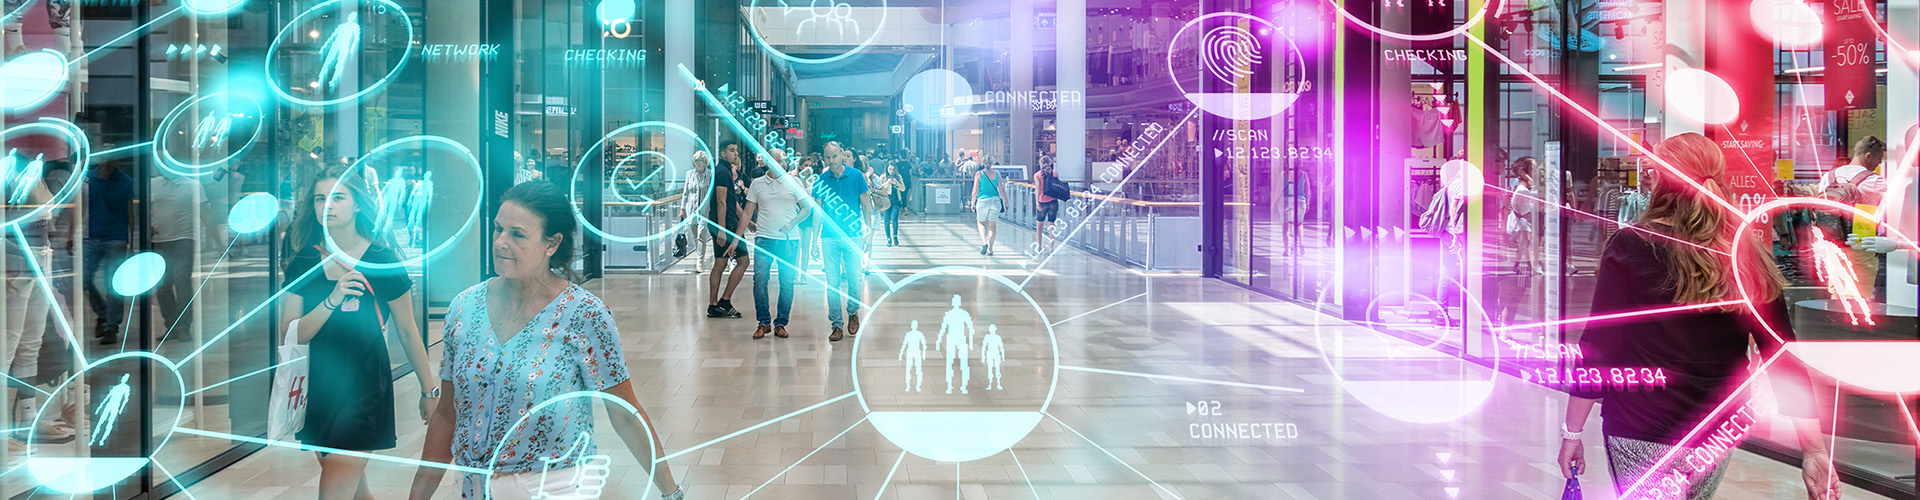 The Role of the Store in Retail 5.0 Banner featuring shoppers at the mall with digital connection icons overlaid